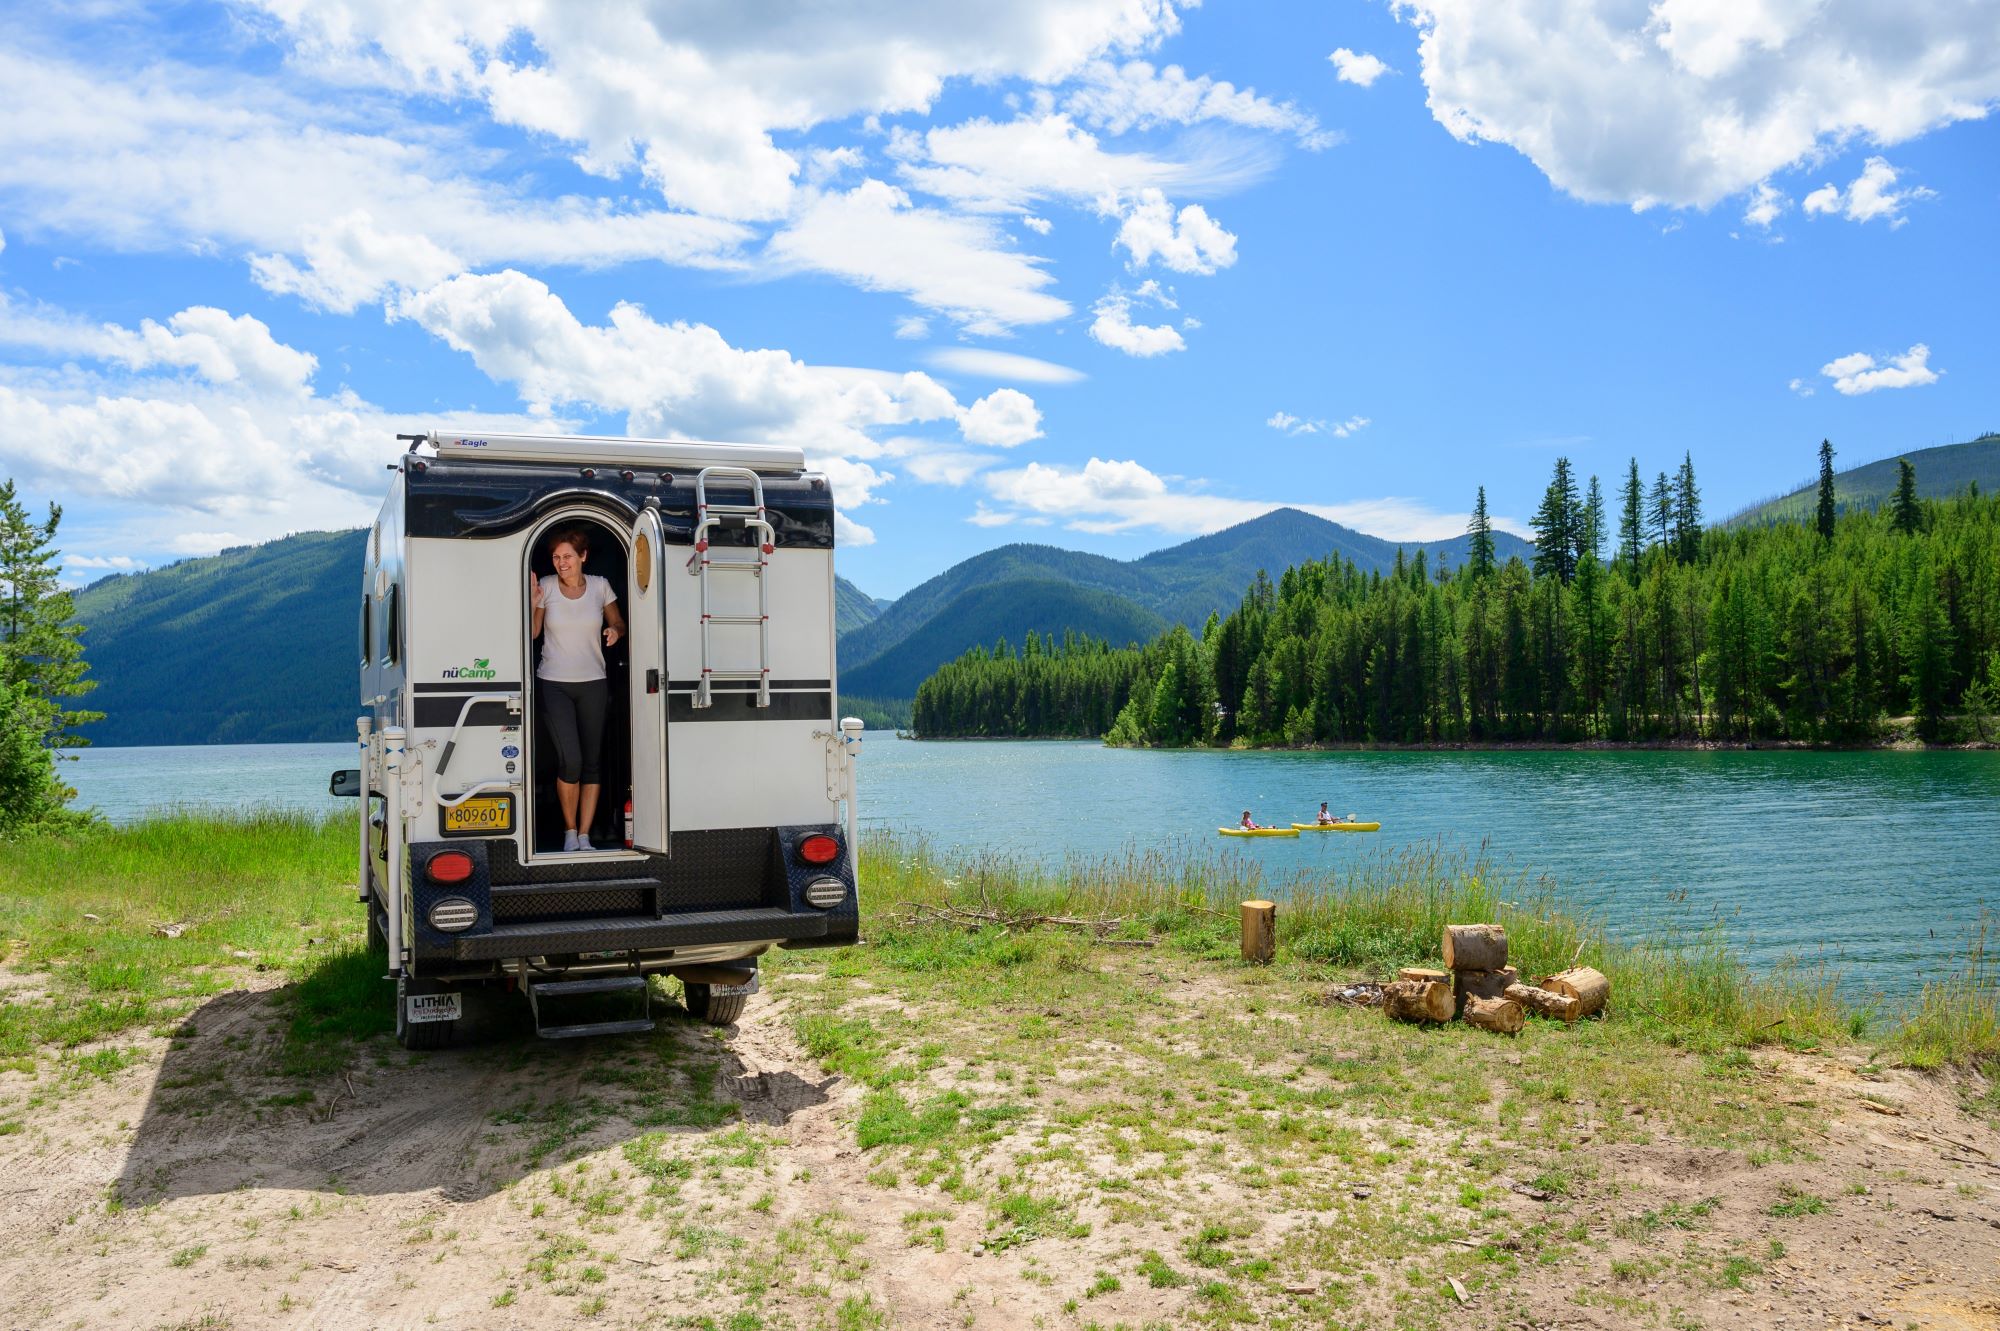 An RV parked in a mountainous area in front of a body of water.